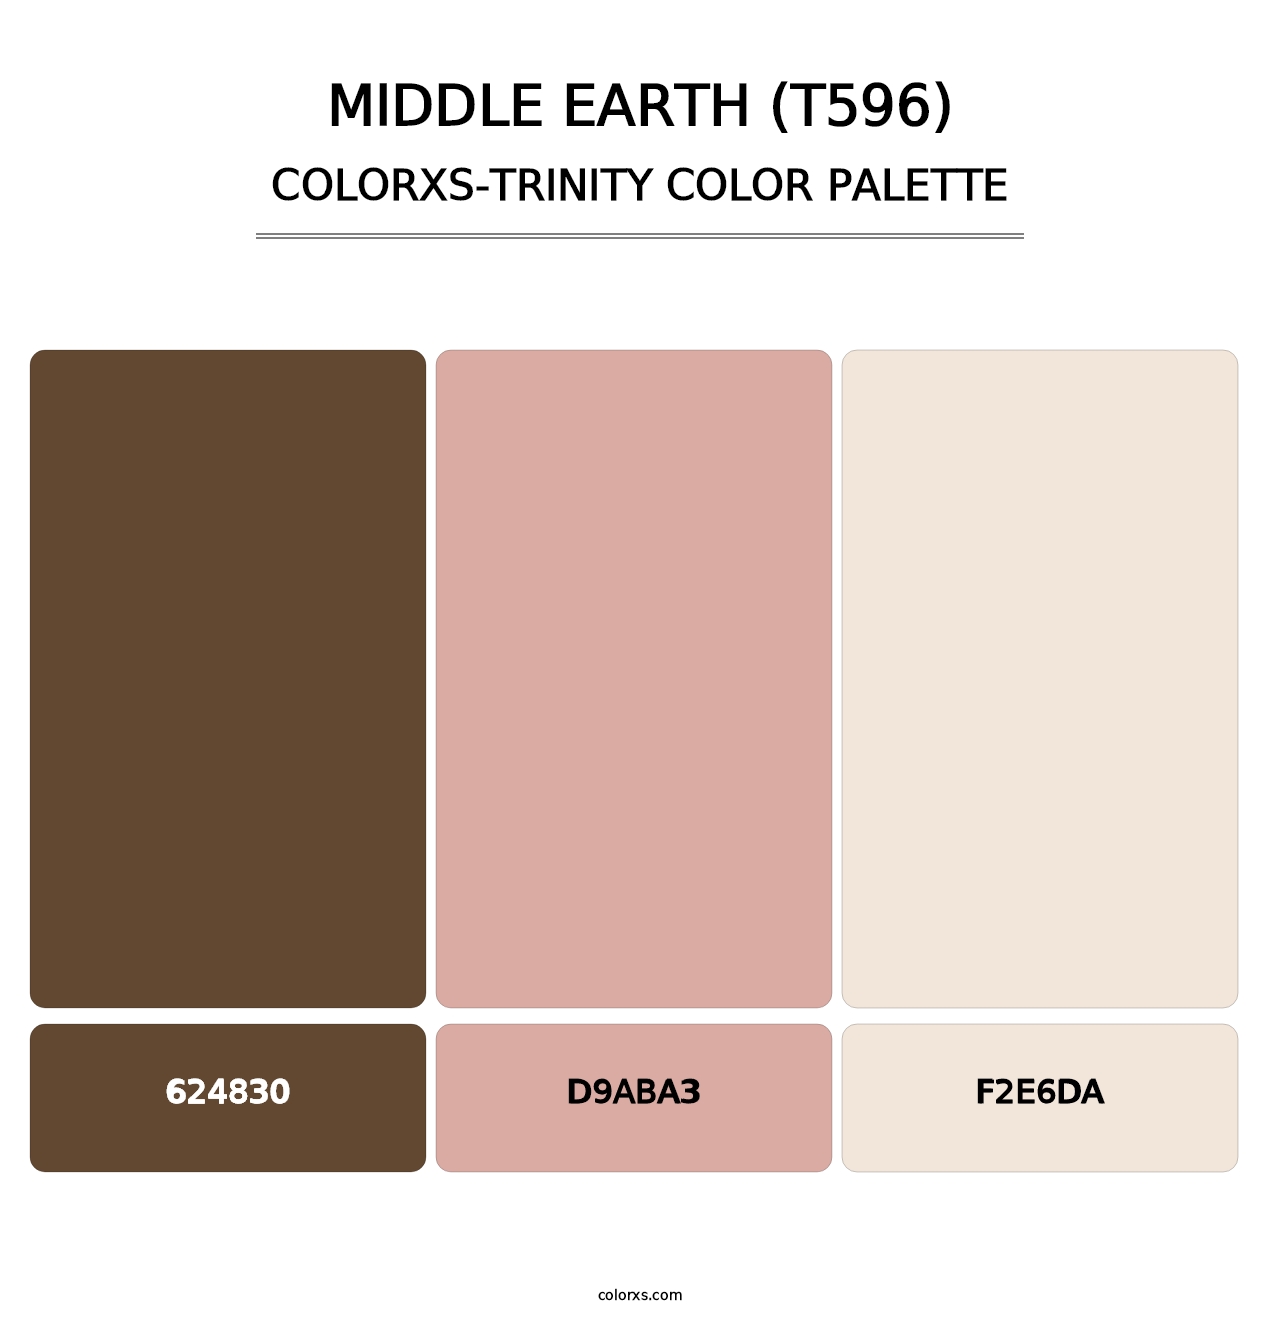 Middle Earth (T596) - Colorxs Trinity Palette